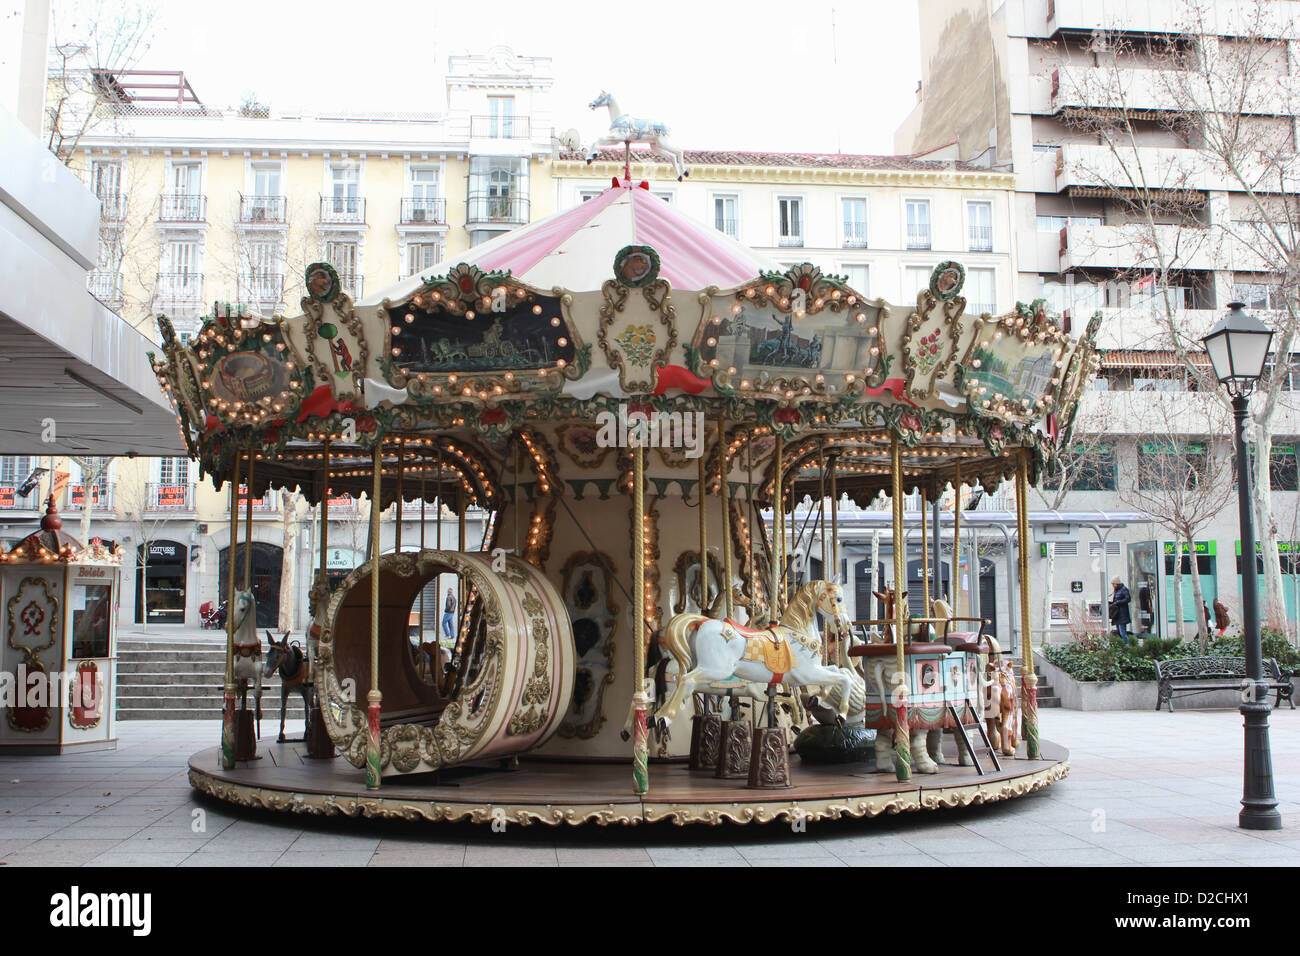 Vintage carousel in the street Stock Photo